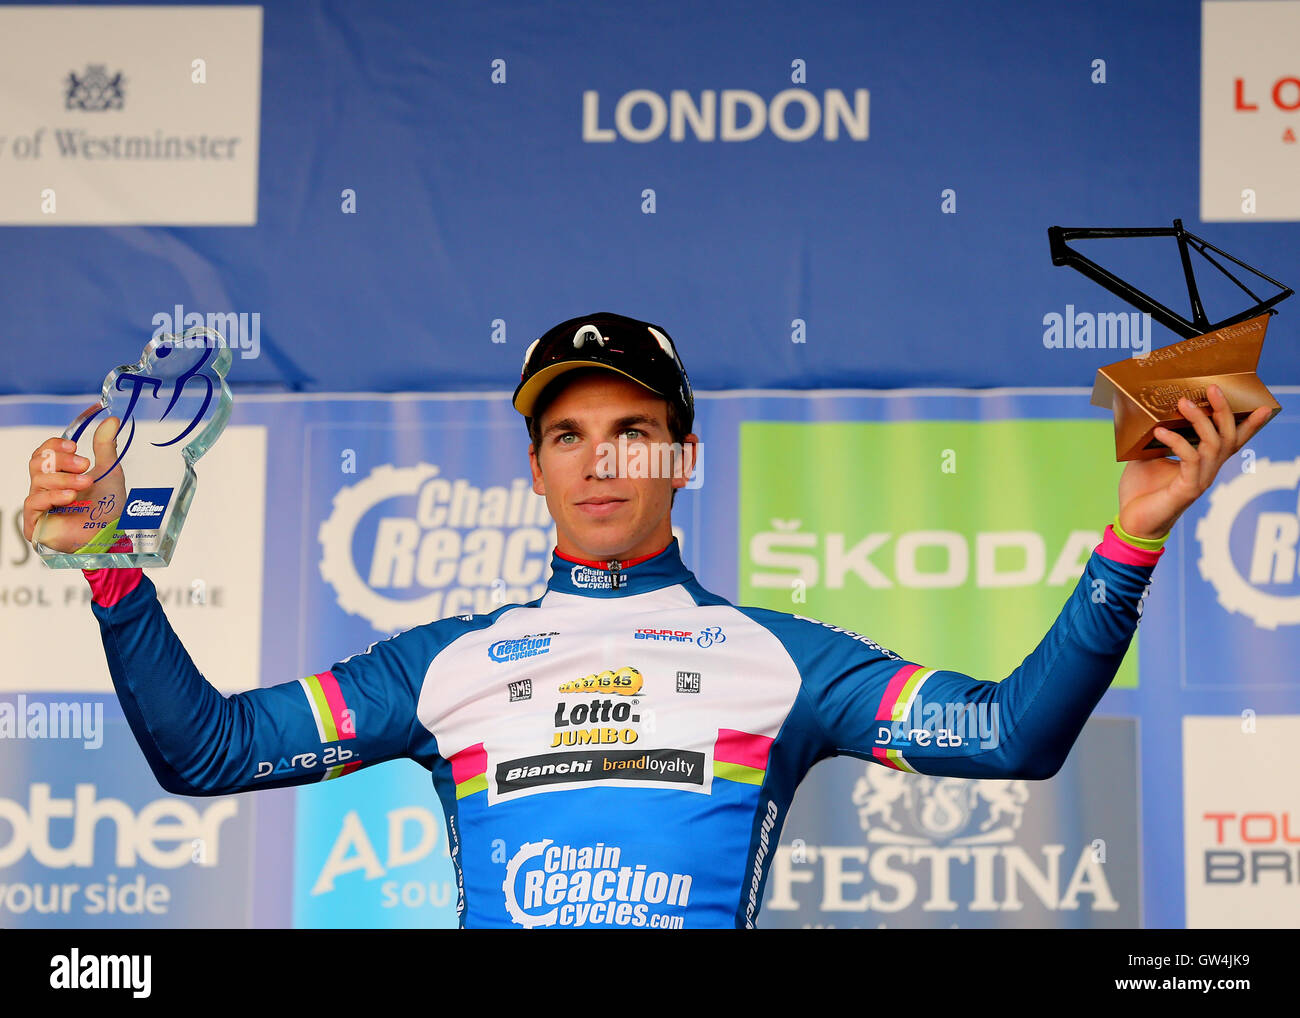 London, UK. 11th Sep, 2016. Tour of Britain Cycling, Stage 8. The London Finishing Stage. Overall Chain Reaction Points Winner Dylan Groenewegen of Team Lotto NL Jumbo celebrates with his Trophy Credit:  Action Plus Sports/Alamy Live News Stock Photo